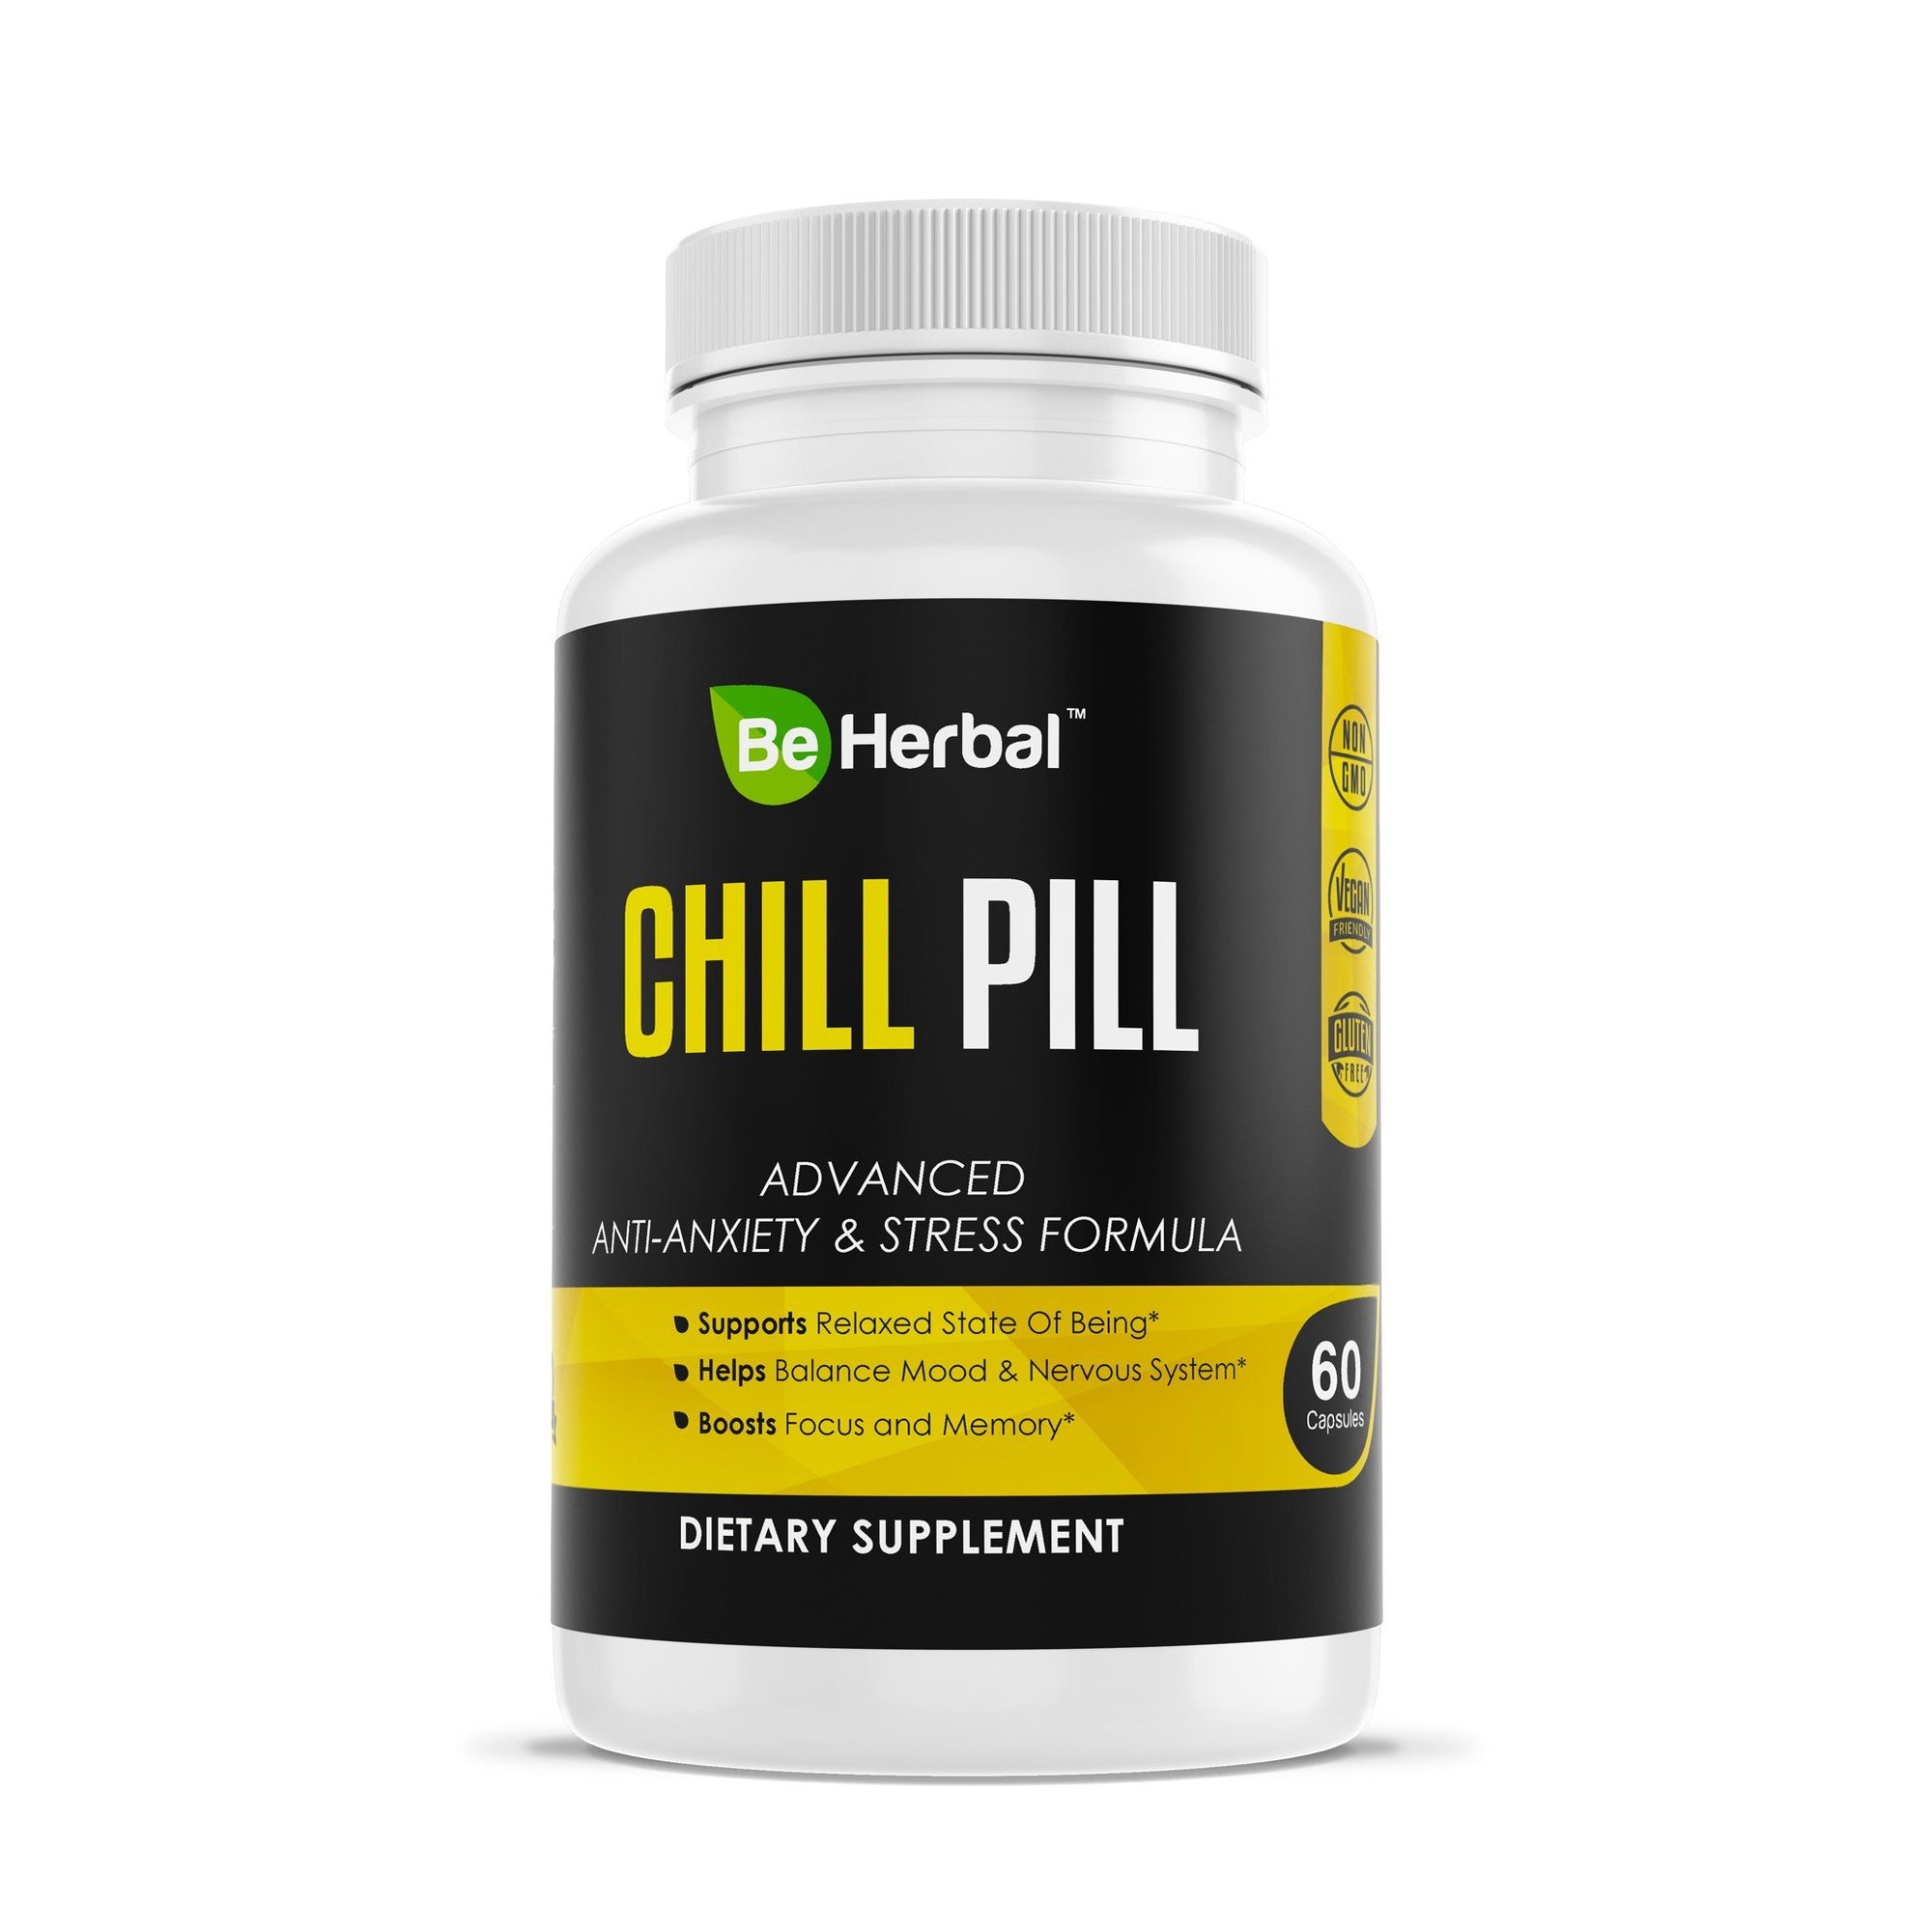 Chill Pill - Advanced Anti Anxiety Formula Herbal Supplements Be Herbal®